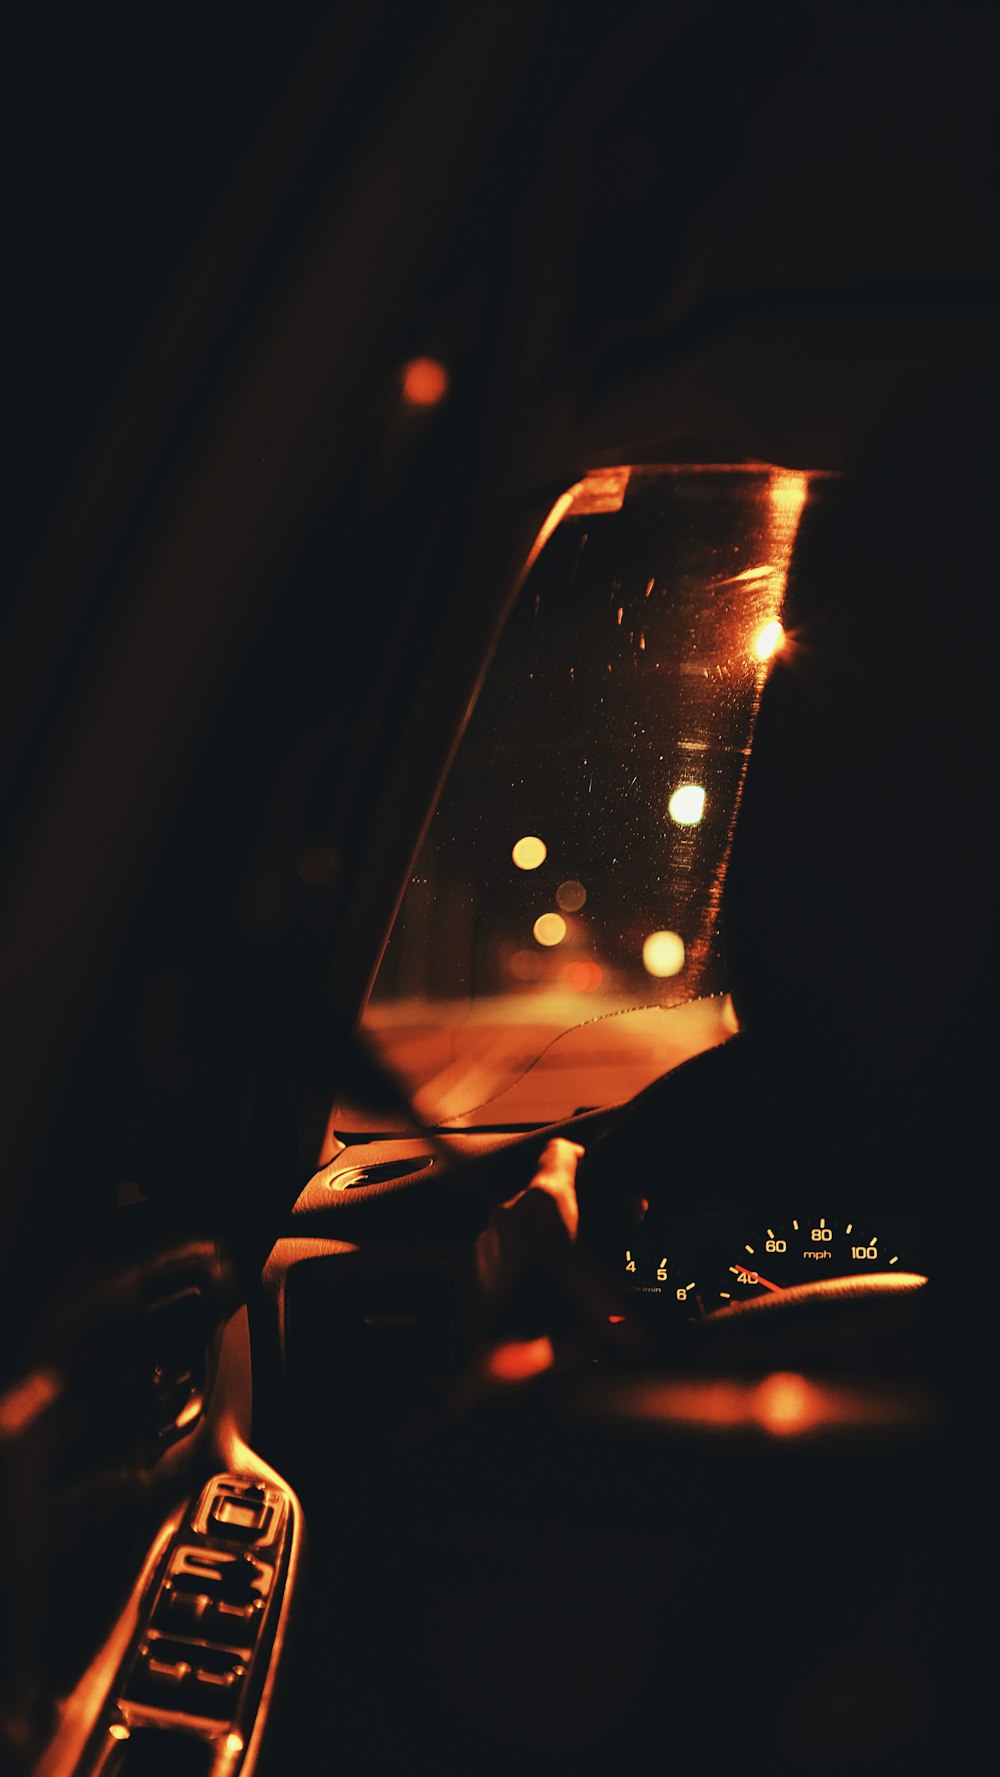 a close up of a car mirror with lights in the background